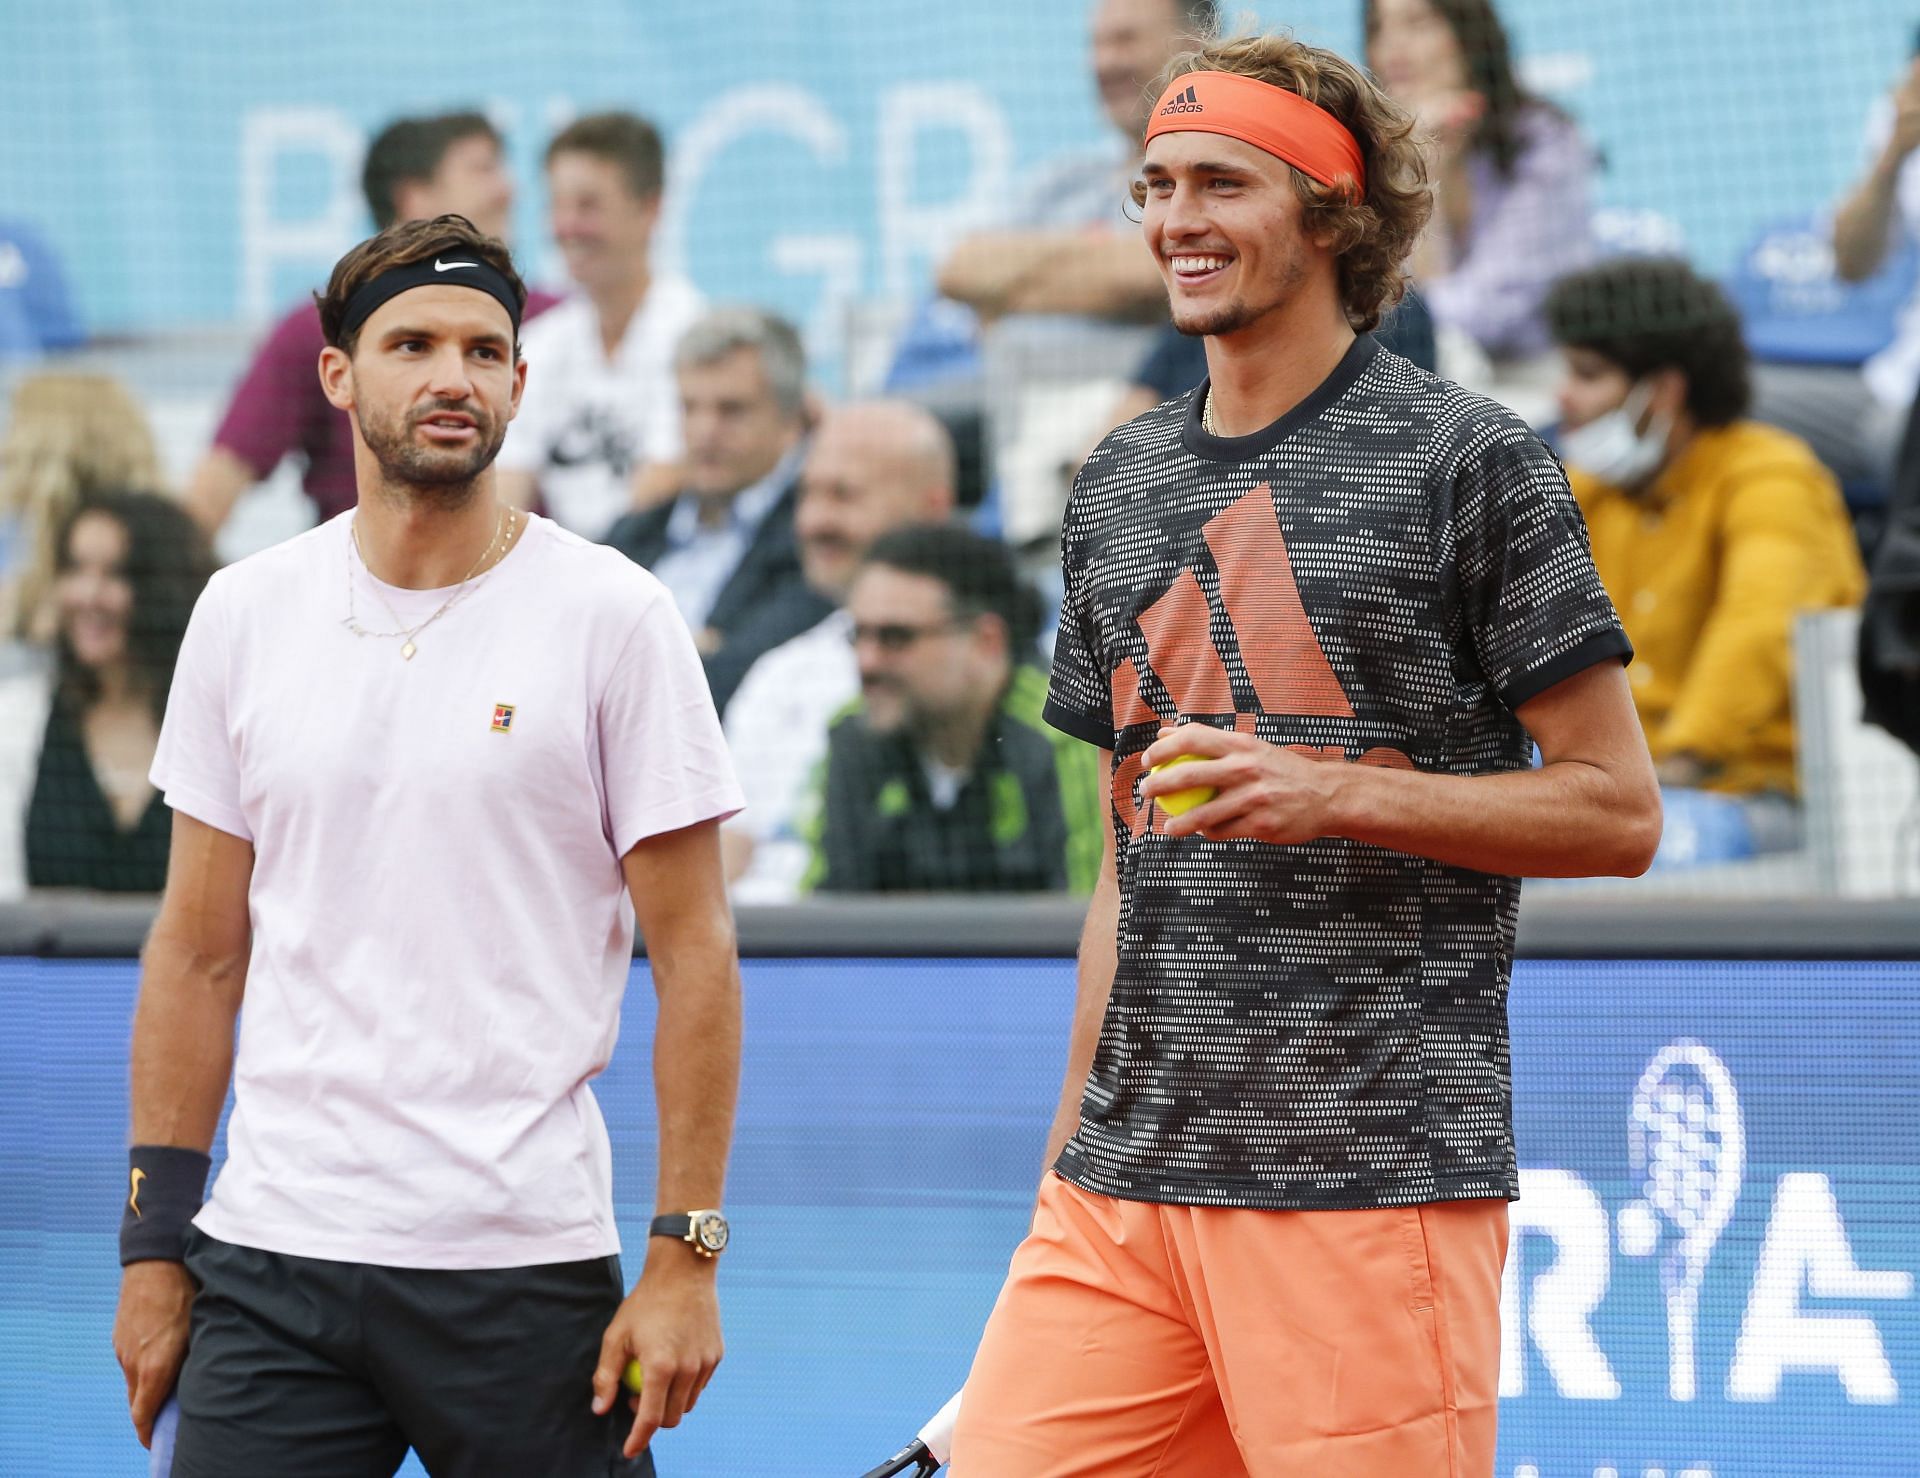 Grigor Dimitrov (L) and Alexander Zverev (R) at the Adria Tour Tennis charity event hosted by Novak Djokovic in 2020